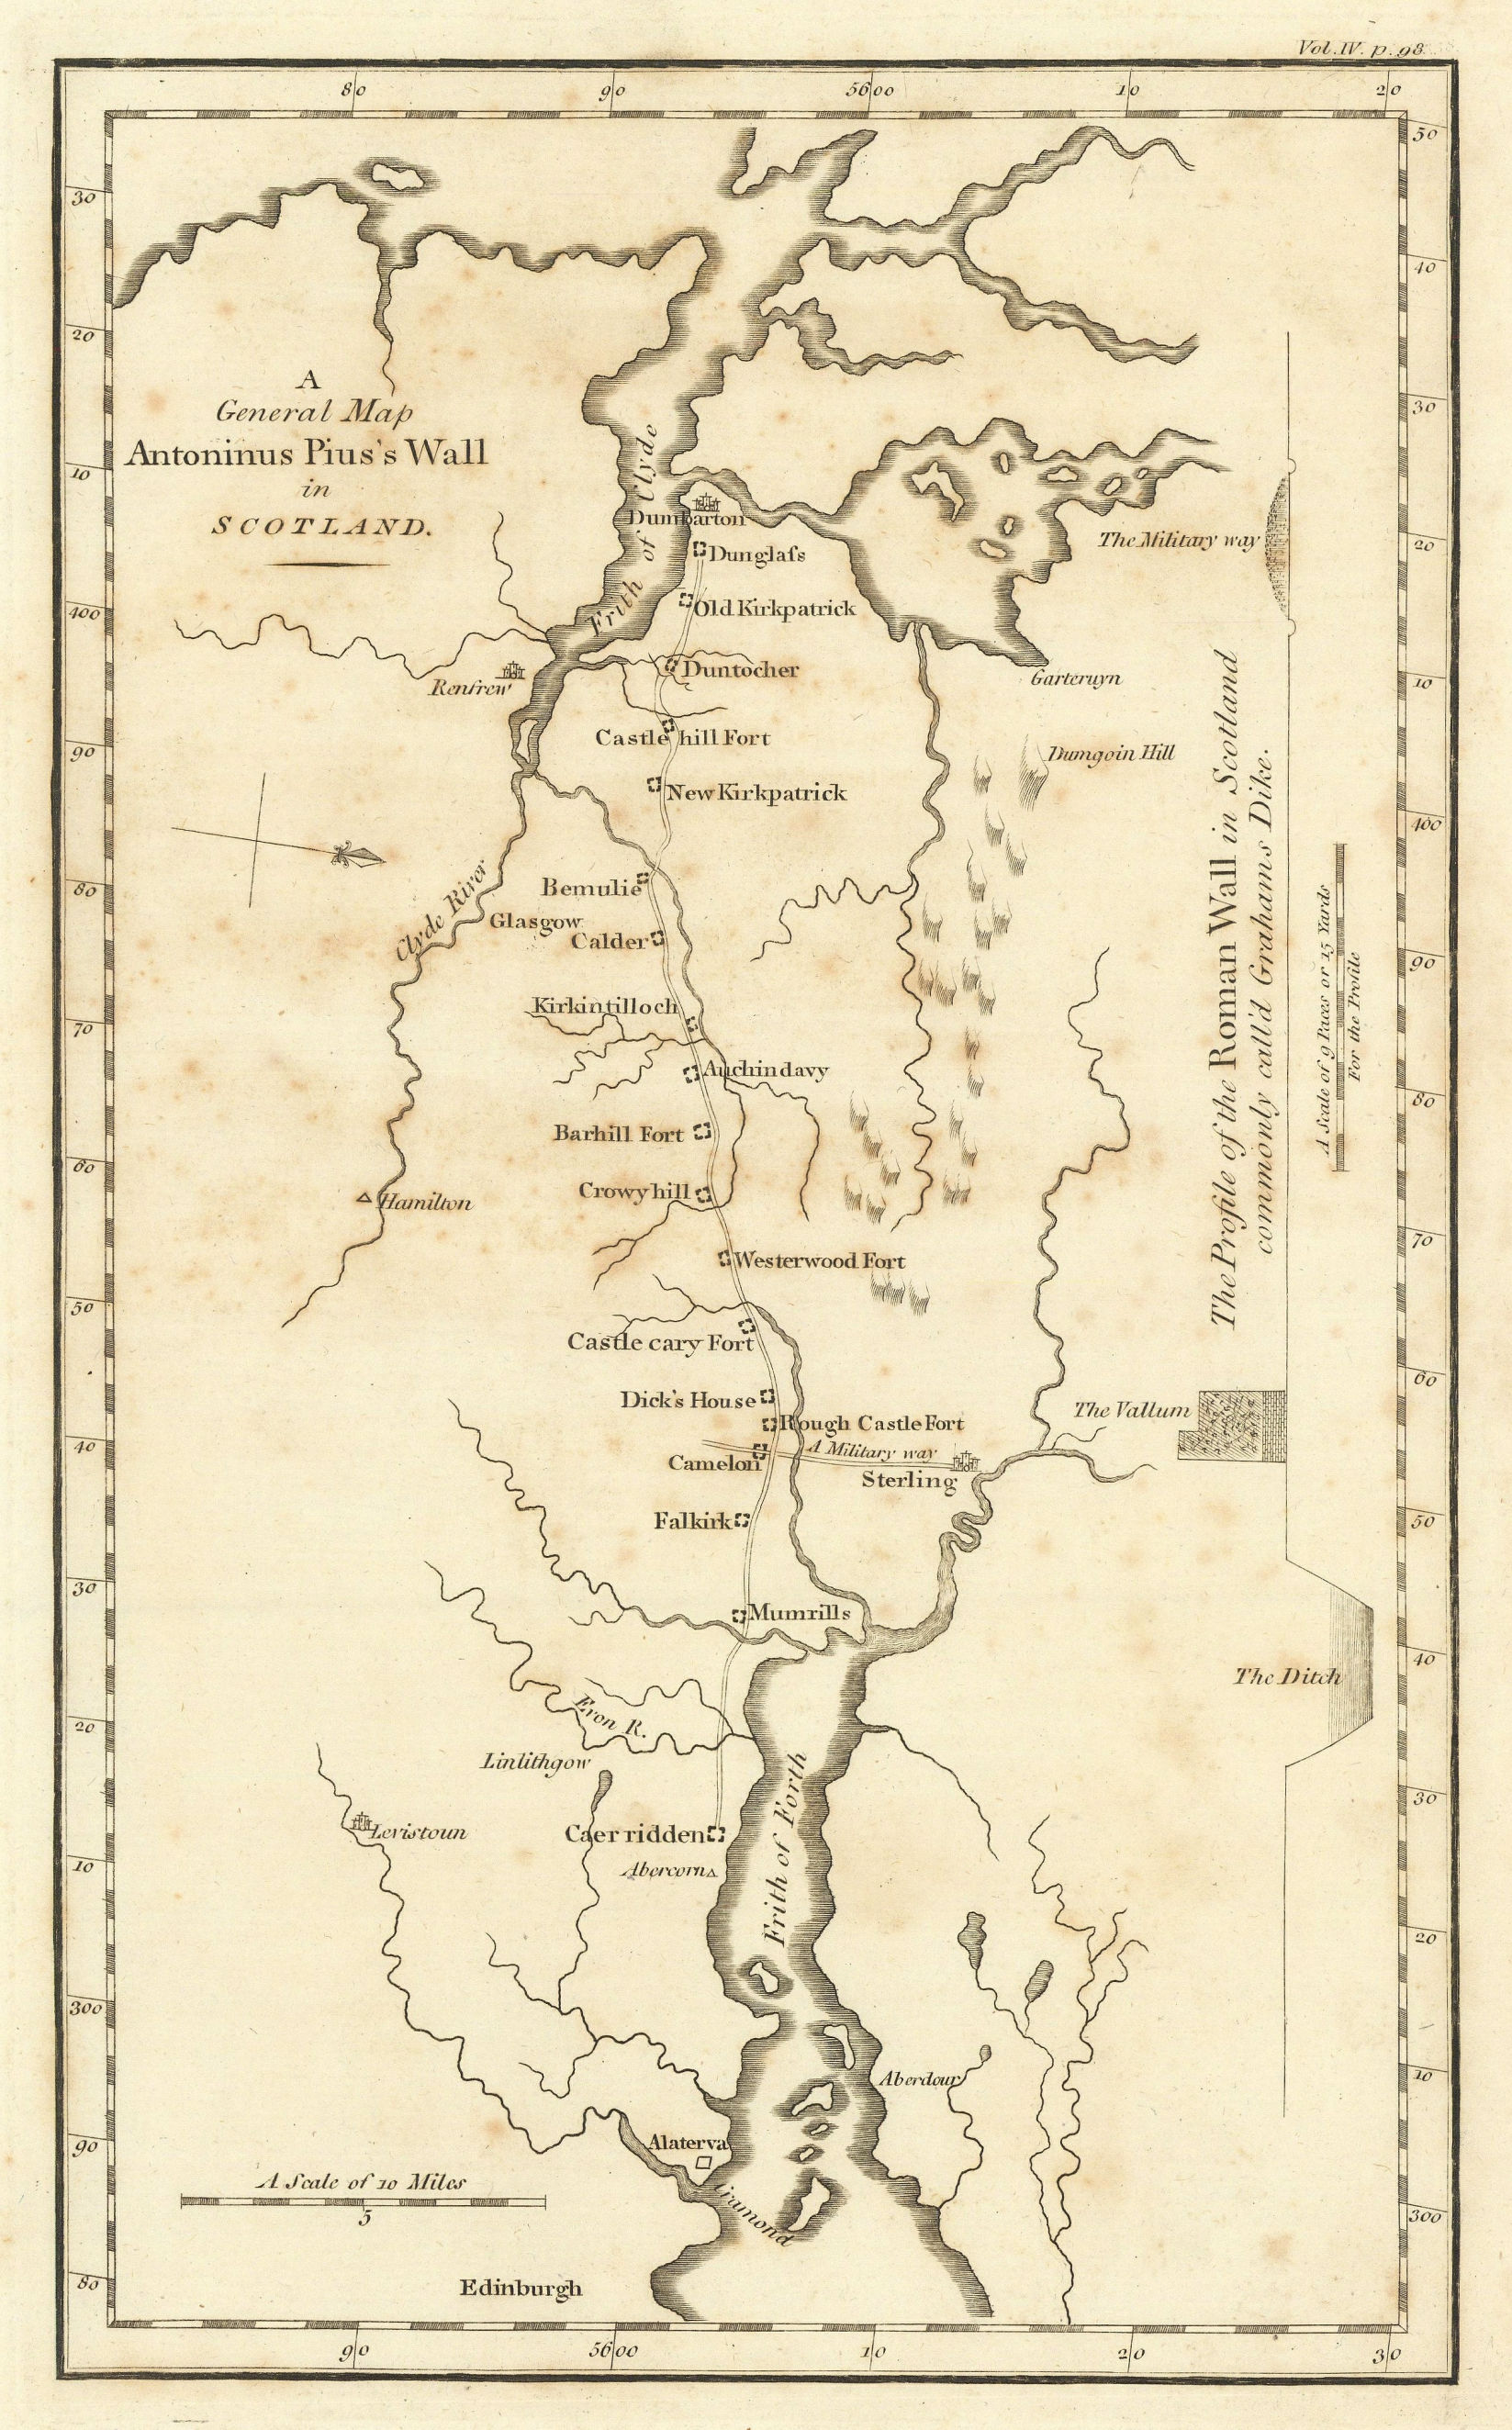 Associate Product "A general map Antoninus Pius' wall in Scotland". Antonine Wall. CARY 1806